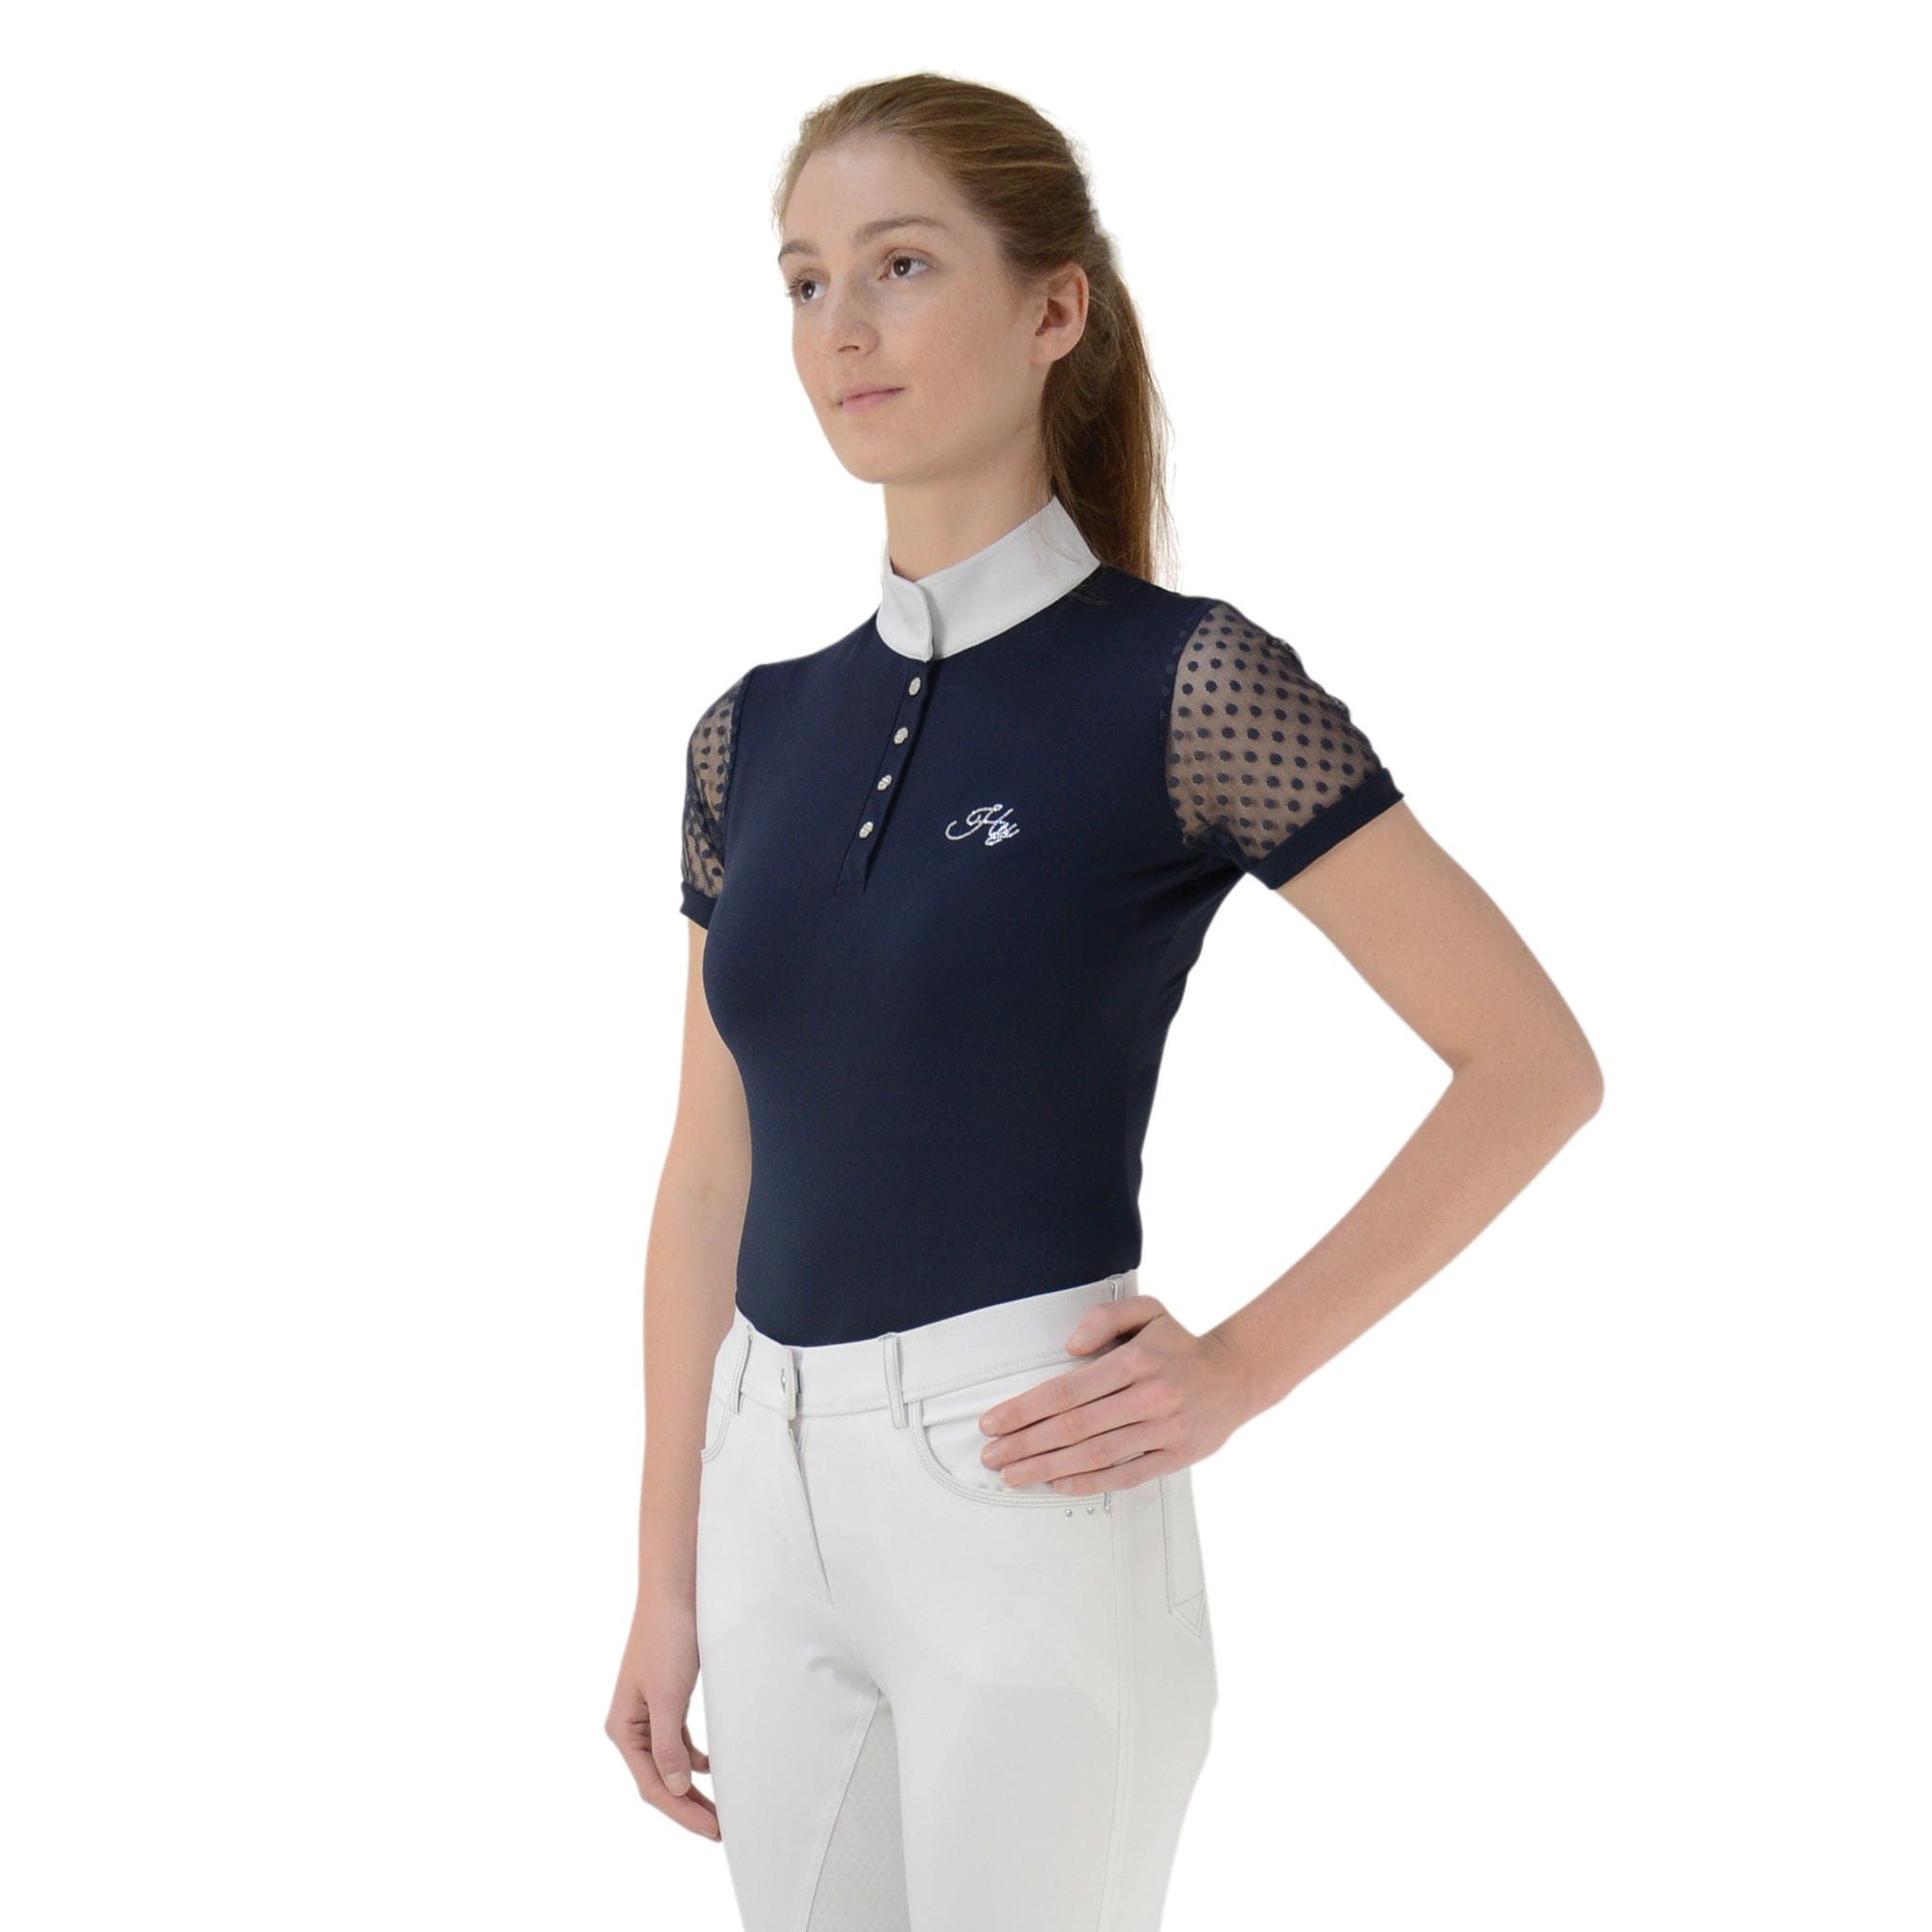 HyFASHION Lydia Lace Short Sleeve Show Shirt 26411 Navy Front View On Model